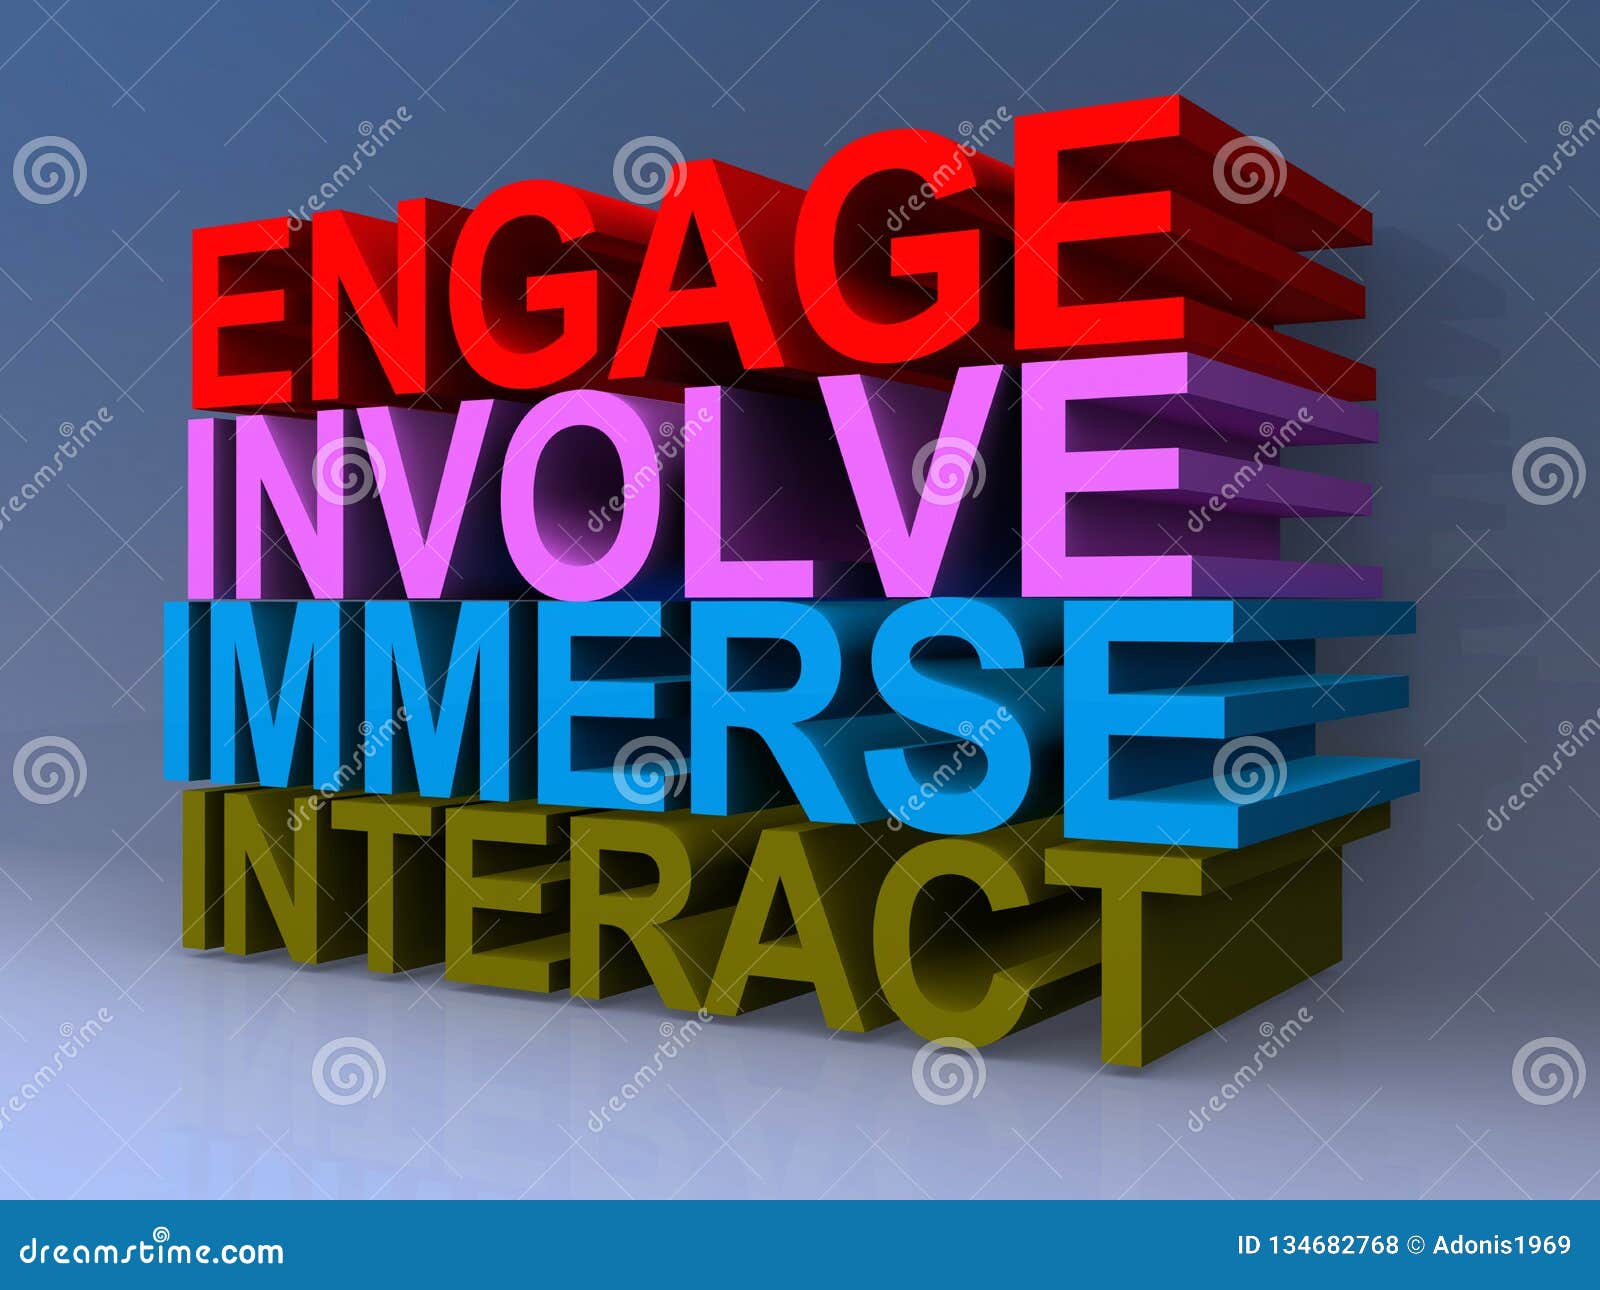 engage involve immerse interact 